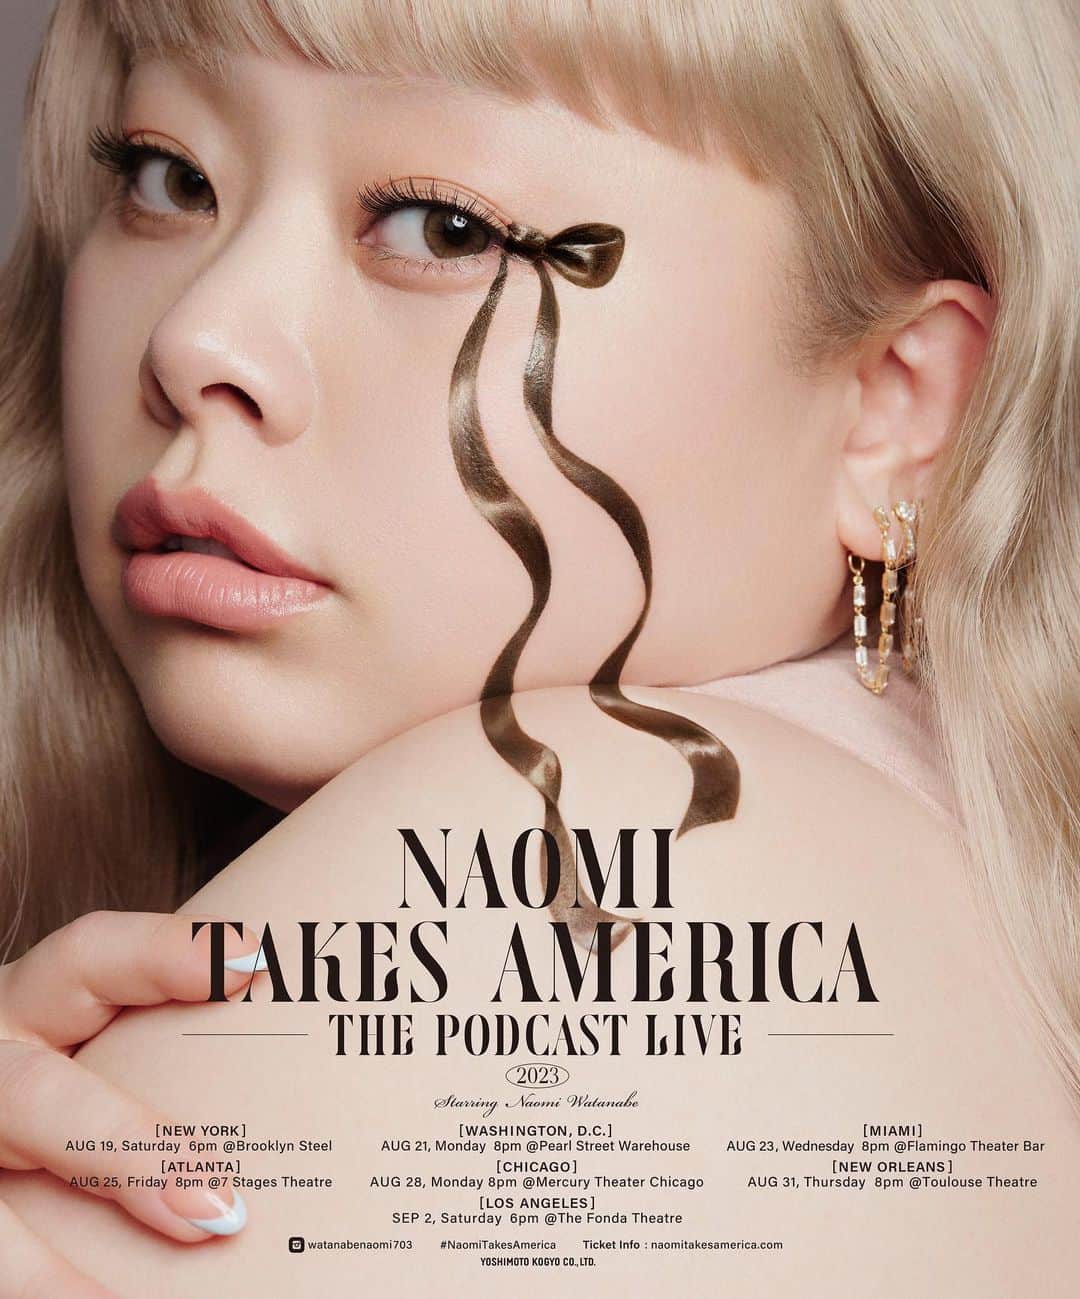 渡辺直美さんのインスタグラム写真 - (渡辺直美Instagram)「Thank you always for listening to the Naomi Takes America podcast!!  This summer, we are jumping out of the studio to hop around the U.S. to do live shows!!  I can't wait to meet all my fans in person!!  Just like in the podcast, I hope to talk and have a great time with everyone that comes to the shows.   Tell me all about your city🫶  The shows will all be in English‼︎  Let's see if you guys will be able to understand my English lol Accidents may happen but let's have fun!!😂  Cities here💁‍♀️ (Ticket sale start time in local time)  New York @ Brooklyn Steel Saturday, Aug 19, 6pm (🎫sales start Aug 8, 8pm)  Washington, D.C. ＠Pearl Street Warehouse Monday, Aug 21,  8pm (🎫sales start Aug 8, 8pm)  Miami ＠Flamingo Theater Bar Wednesday, Aug 23,  8pm (🎫sales start Aug 8, 8pm)  Atlanta ＠7 Stages Theatre  Friday, Aug 25, 8pm (🎫sales start Aug 14 , 8pm)  Chicago ＠Mercury Theater  Monday, Aug 28, 8pm (🎫sales start Aug 10, 7pm)  New Orleans ＠Toulouse Theatre Thursday, Aug 31, 8pm (🎫sales start Aug 8, 7pm)  Los Angeles ＠The Fonda Theatre Saturday, Sep 2,  6pm (🎫sales start Aug 14 , 5pm)  Tickets can be purchased from link in profile🔗  Also, season 3 of the podcast will be starting this Thursday🎀 Please check it out!   Poster was designed by @yuni_yoshida  It's so cute🫶  ポッドキャストNaomi Takes Americaを聴いてくれてる皆様いつもありがとうございます！！  この夏、スタジオから飛び出して 全米各地でライブすることになりました！！！ ライブツアー！！！！！ わーい！ドキドキ！！  ポッドキャスト同様みんなとお話ししながらトークしていくライブだよ！！  ぐにょぐにょ英語で頑張ります！笑 ぜひあなたの街について教えて下さい！  公演情報とチケット発売日は現地時間で上記に記載しています！！  詳細はプロフィールにあるリンクから🔗  あとシーズン3も今週からスタート🎀 お楽しみにー！  ポスターは @yuni_yoshida さんデザインです！ 目がリボンの片方になってるにょ！ 全部手書き！！うにょ！  #naomitakesamerica」8月7日 10時59分 - watanabenaomi703